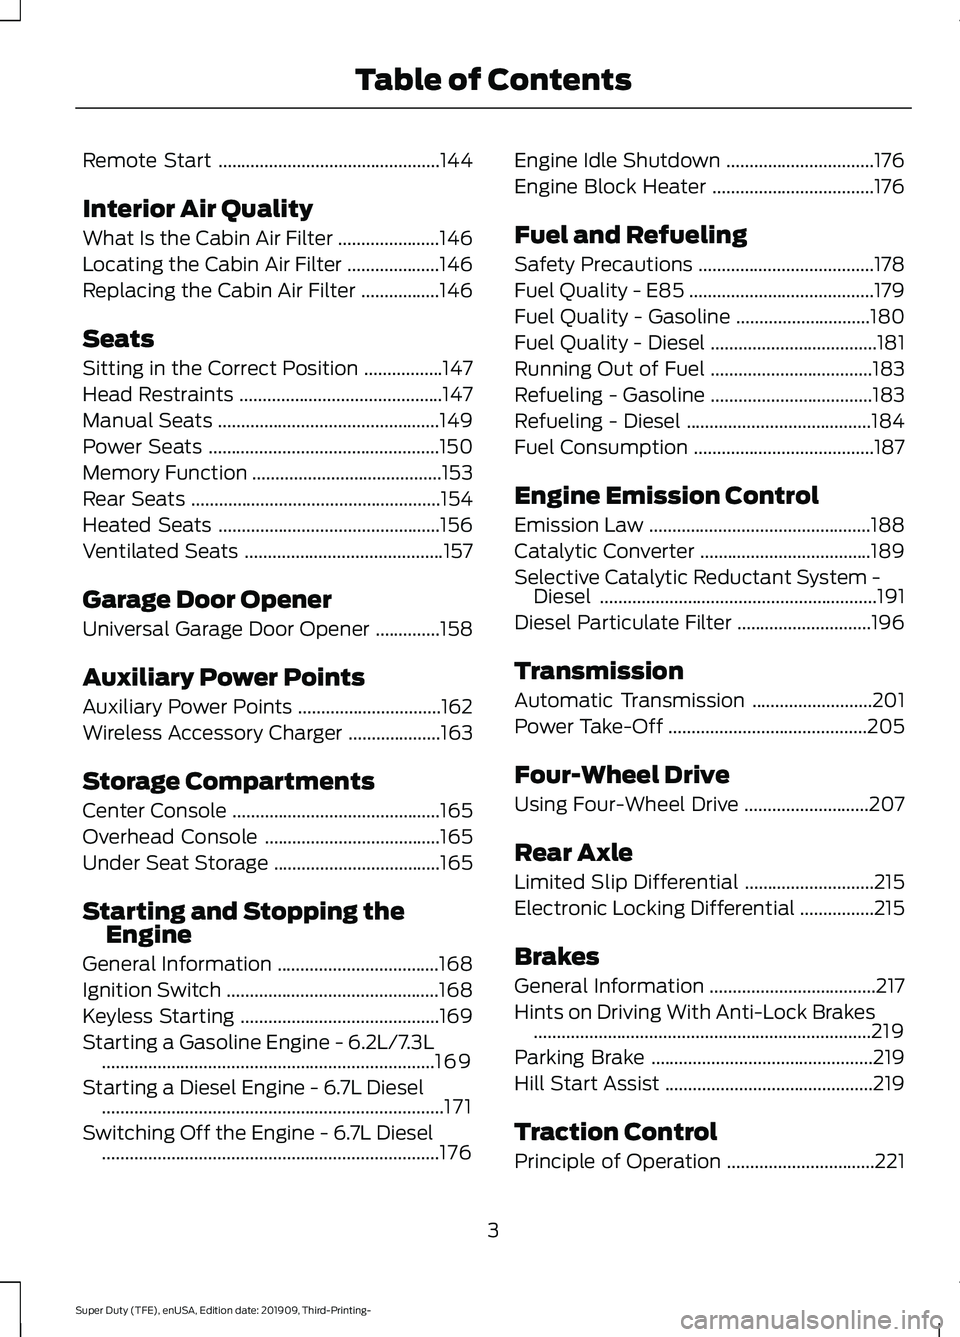 FORD F-550 2020  Owners Manual Remote Start
................................................144
Interior Air Quality
What Is the Cabin Air Filter ......................
146
Locating the Cabin Air Filter ....................
146
Rep